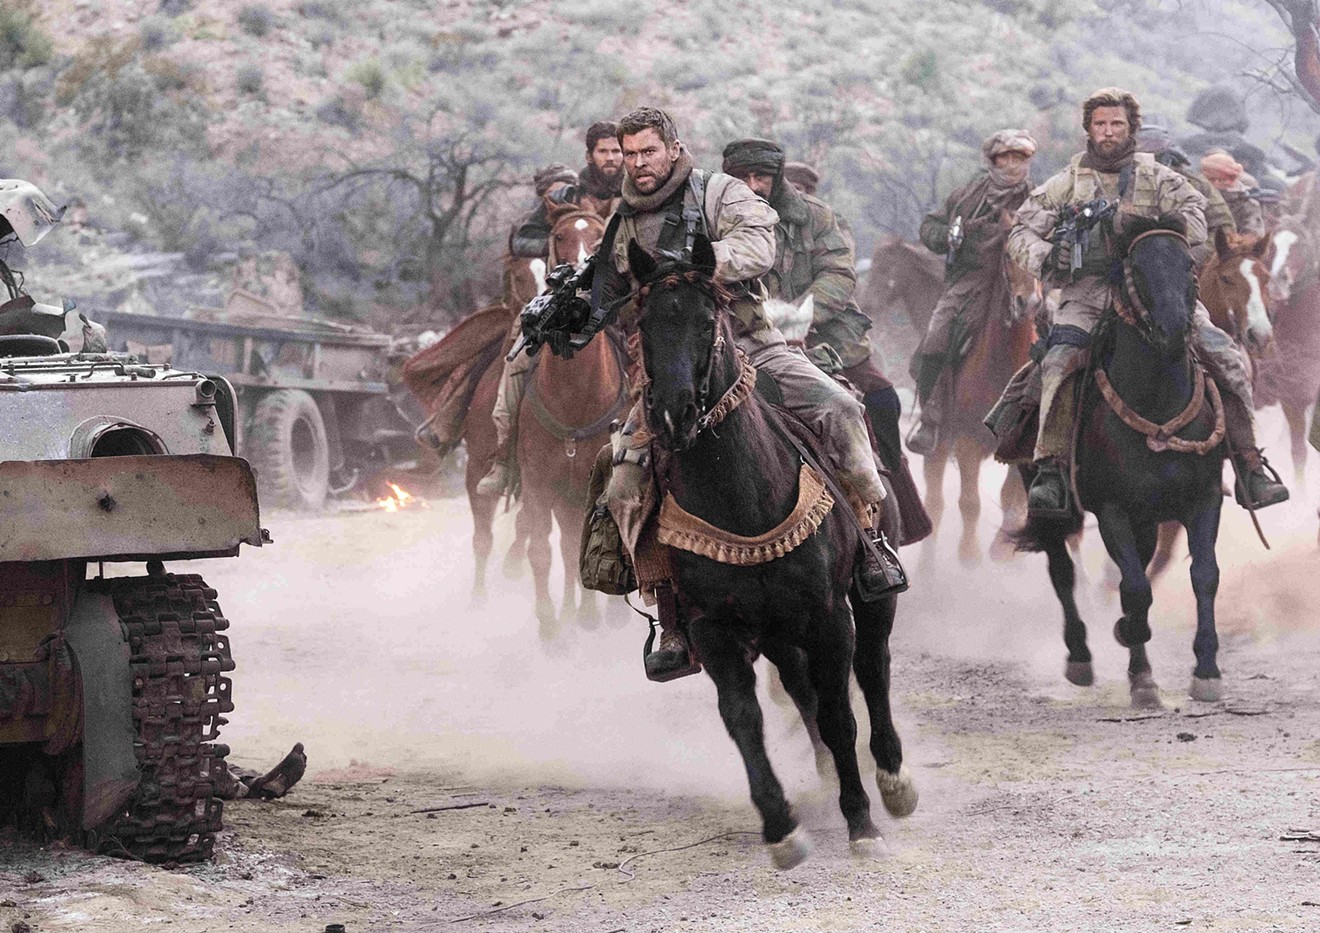 In Nicolai Fuglsig’s 12 Strong, Chris Hemsworth rides on horseback to lead a squad sent into northern Afghanistan weeks after September 11, 2001, to take the city of Mazar-i-Sharif.